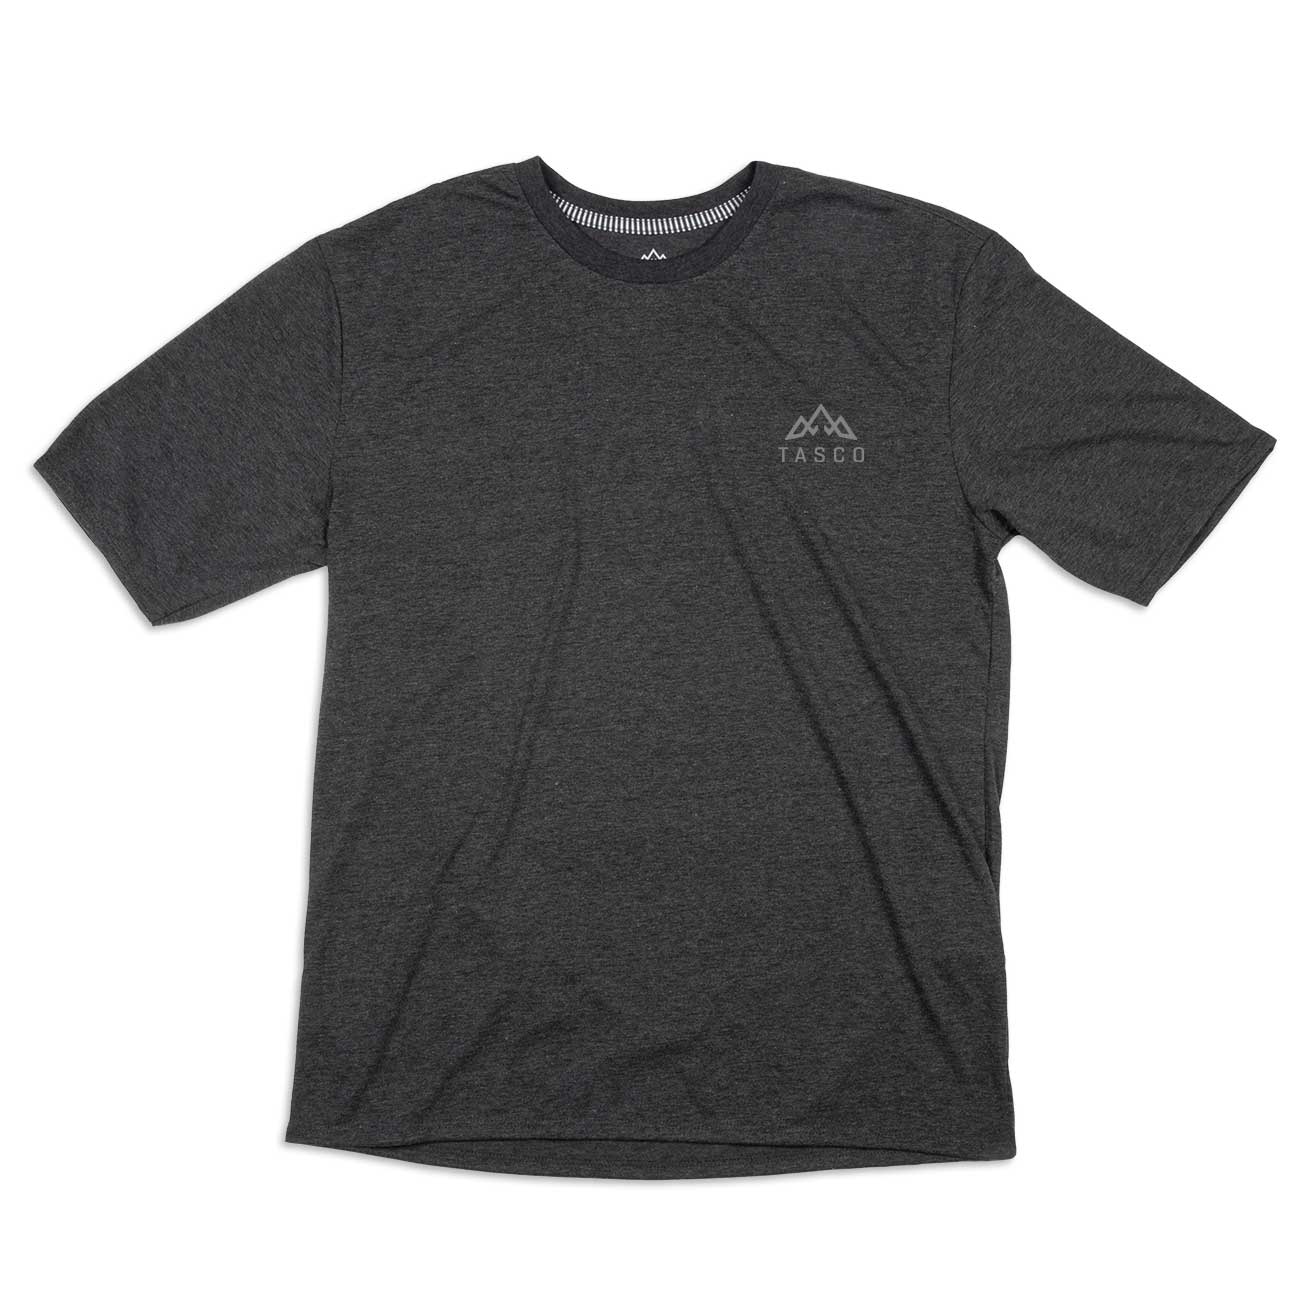 Sessions drirelease® Ride Jersey - Standard (Heather Charcoal)